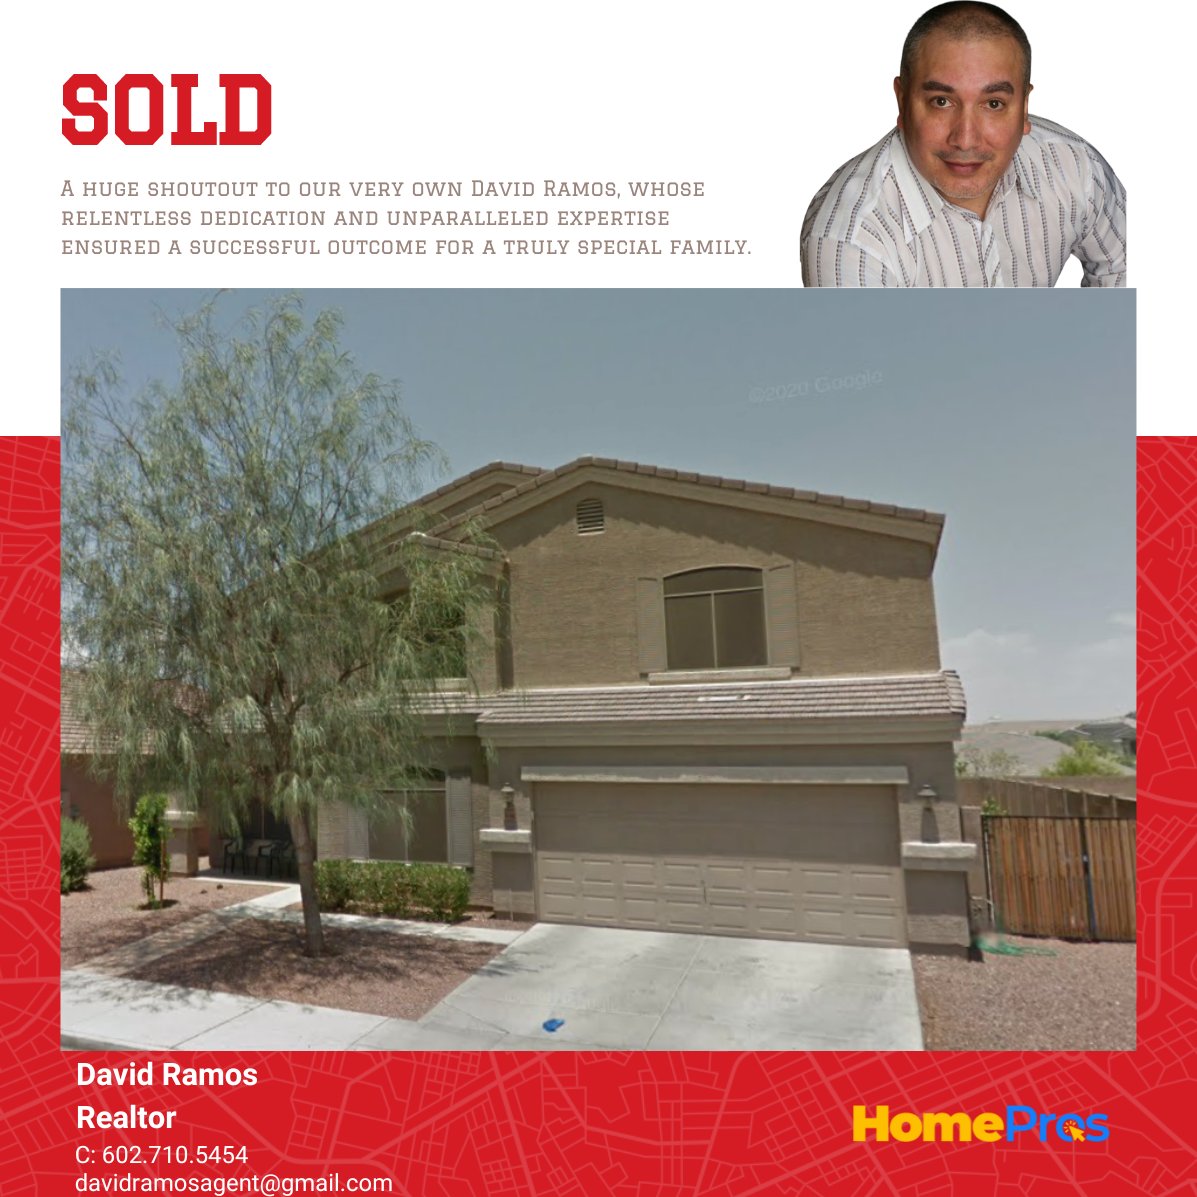 🏠🎉 JUST SOLD! 🎉🏠

A huge shoutout to our very own David Ramos, whose relentless dedication and unparalleled expertise ensured a successful outcome for a truly special family.

#RealEstate #HomeClosing #SuccessStory #SpecialNeeds #DavidRamos #MakingDreamsComeTrue